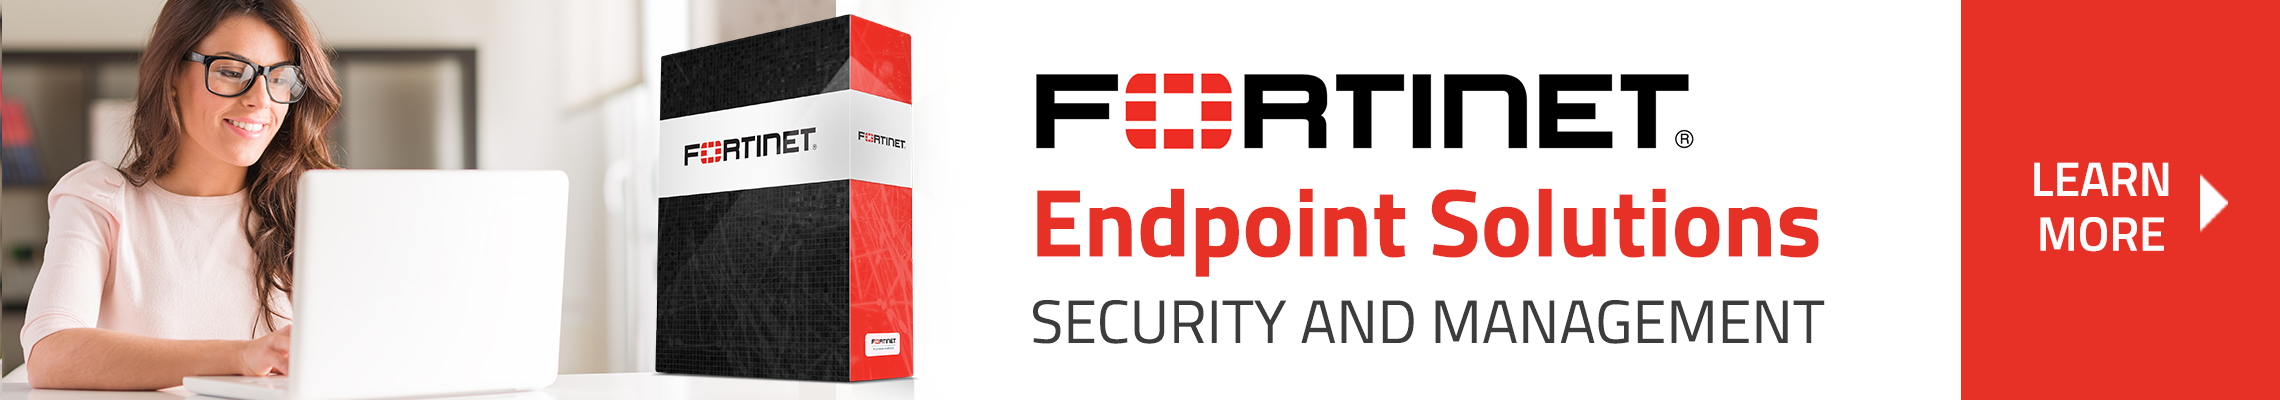 Fortinet Endpoint Solutions Banner